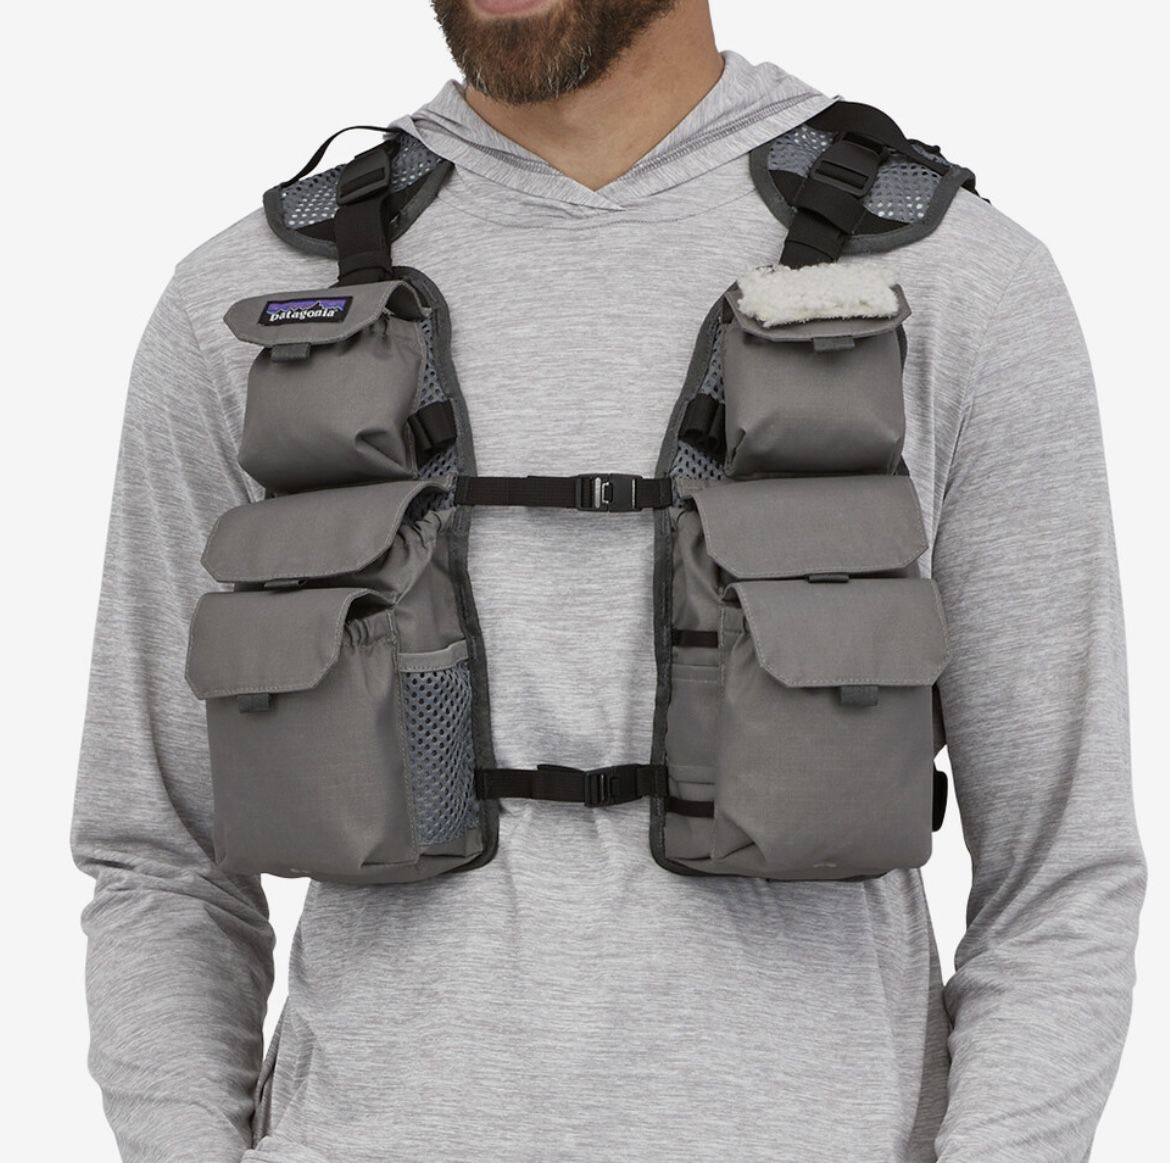 [New]Patagonia Stealth Convertible Vest